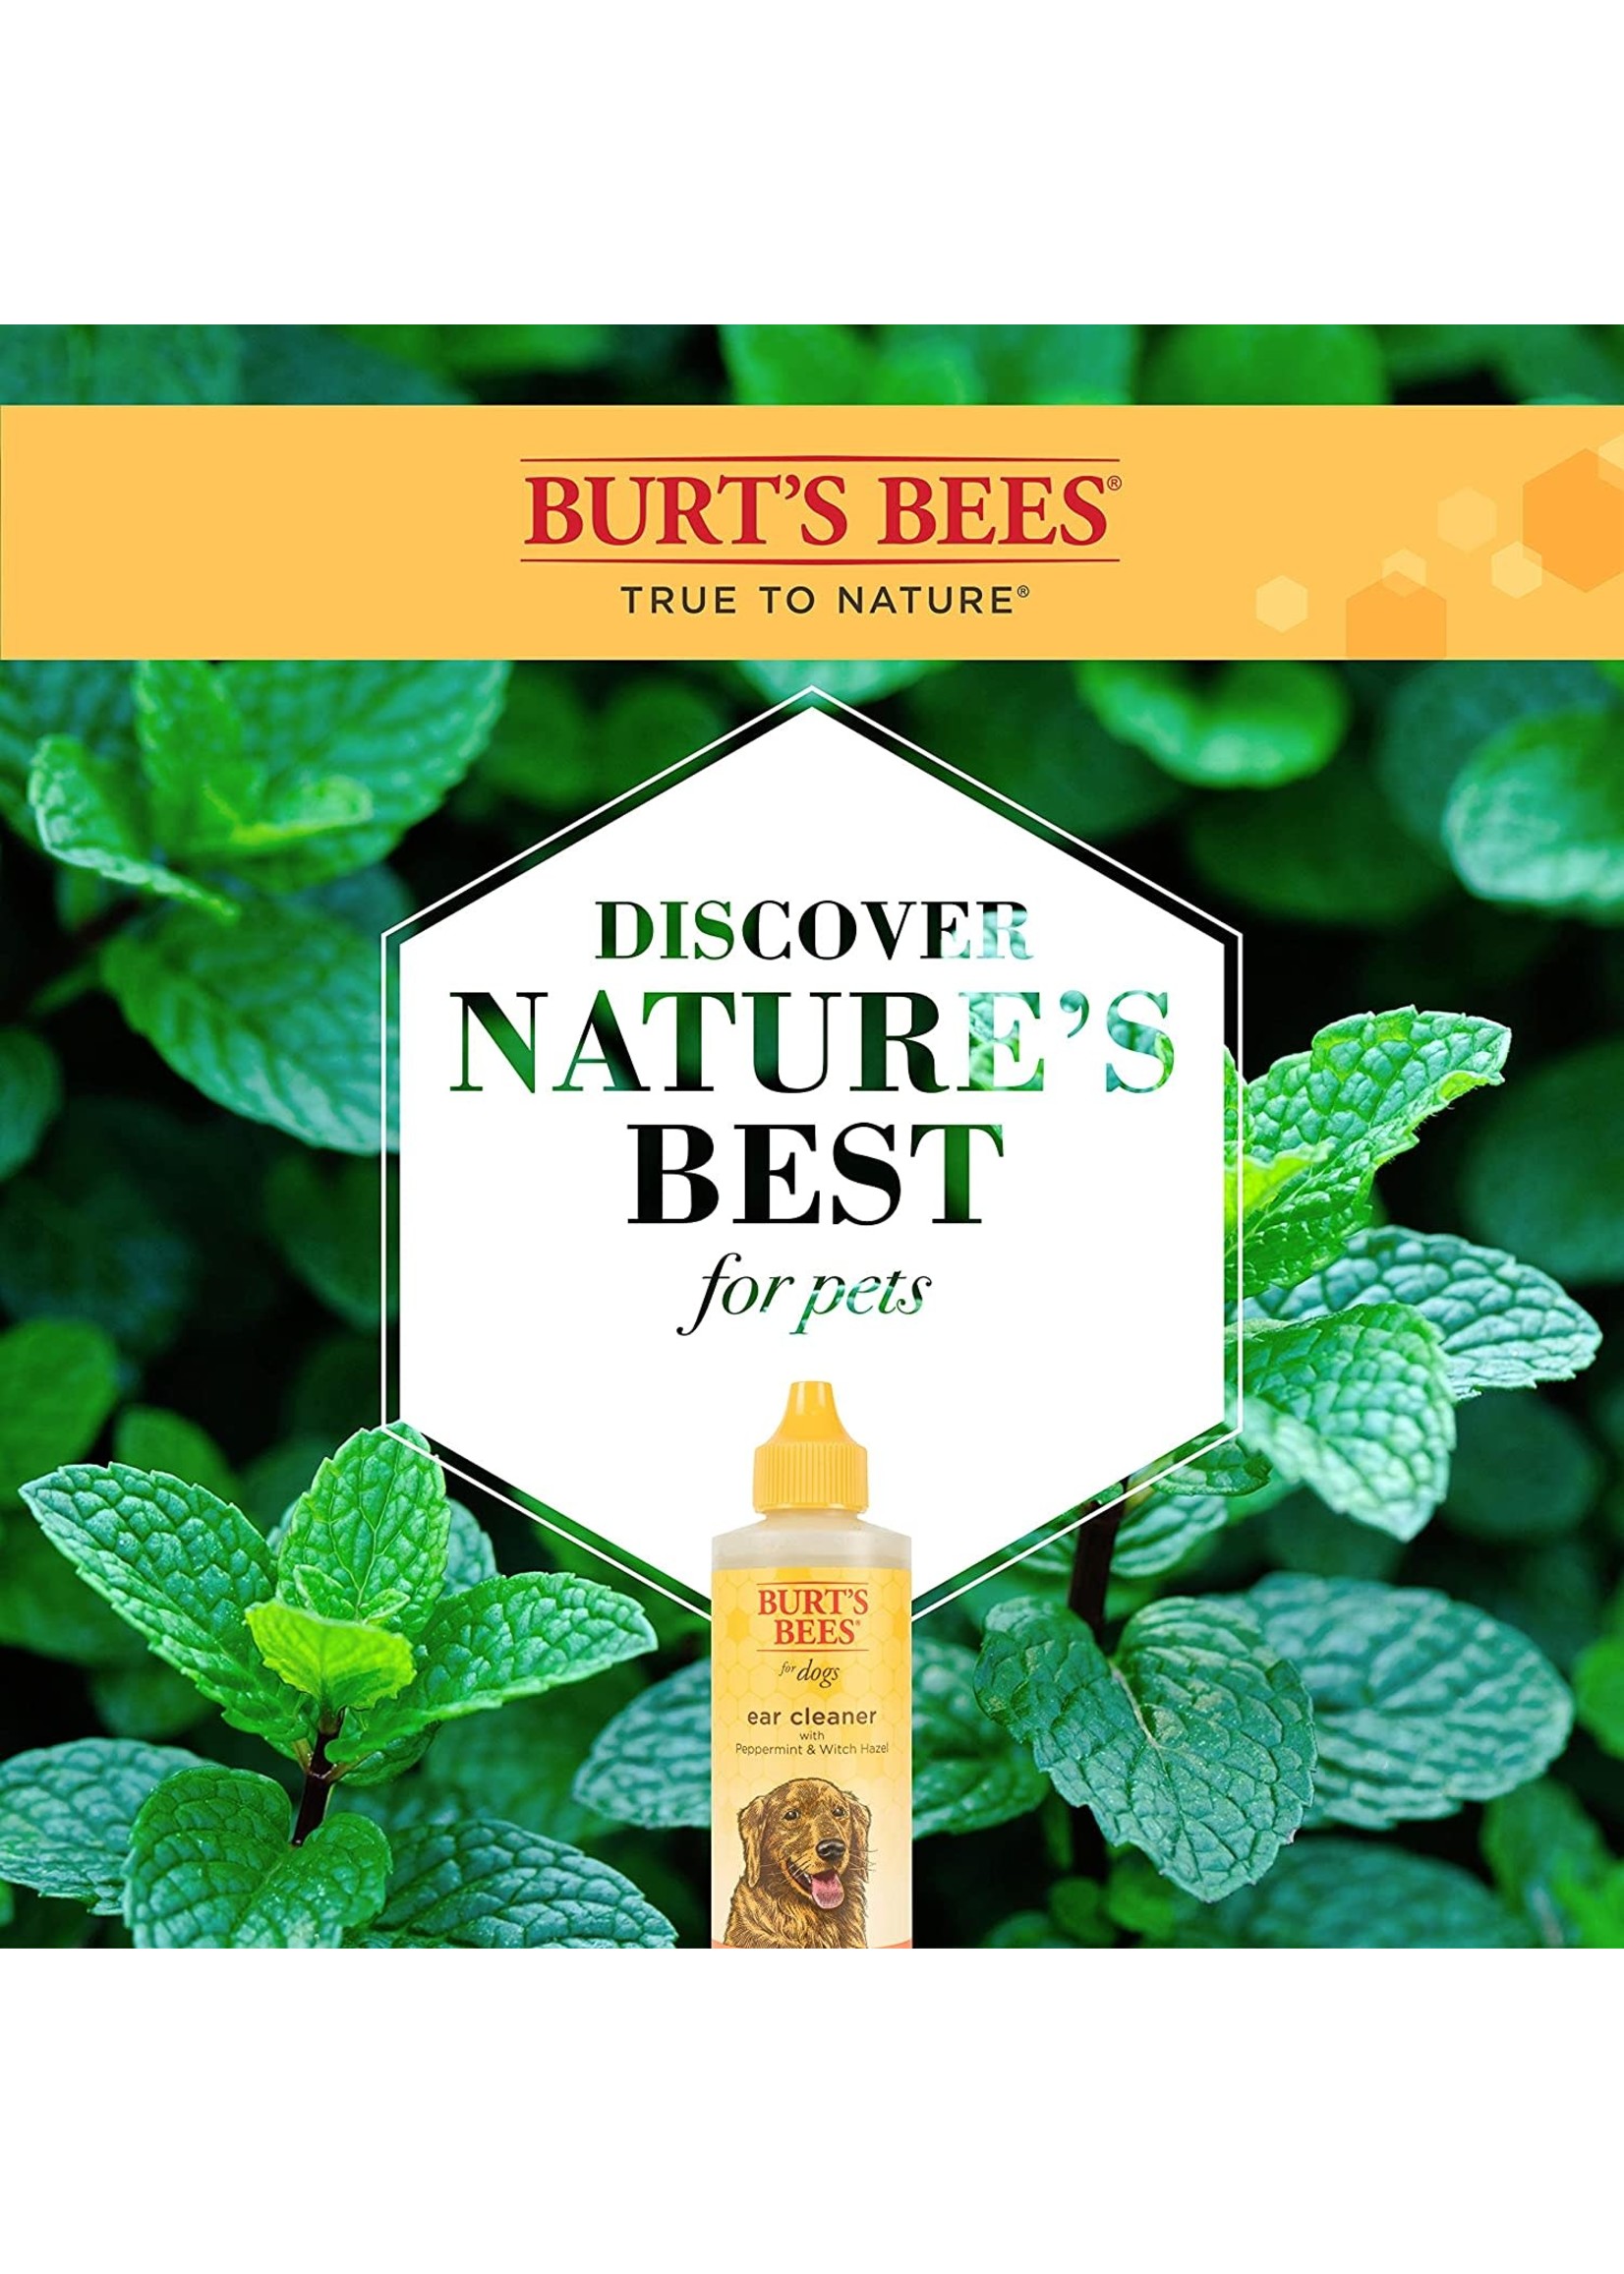 Burt's Bees For Dogs Natural Ear Cleaner with Peppermint and Witch Hazel